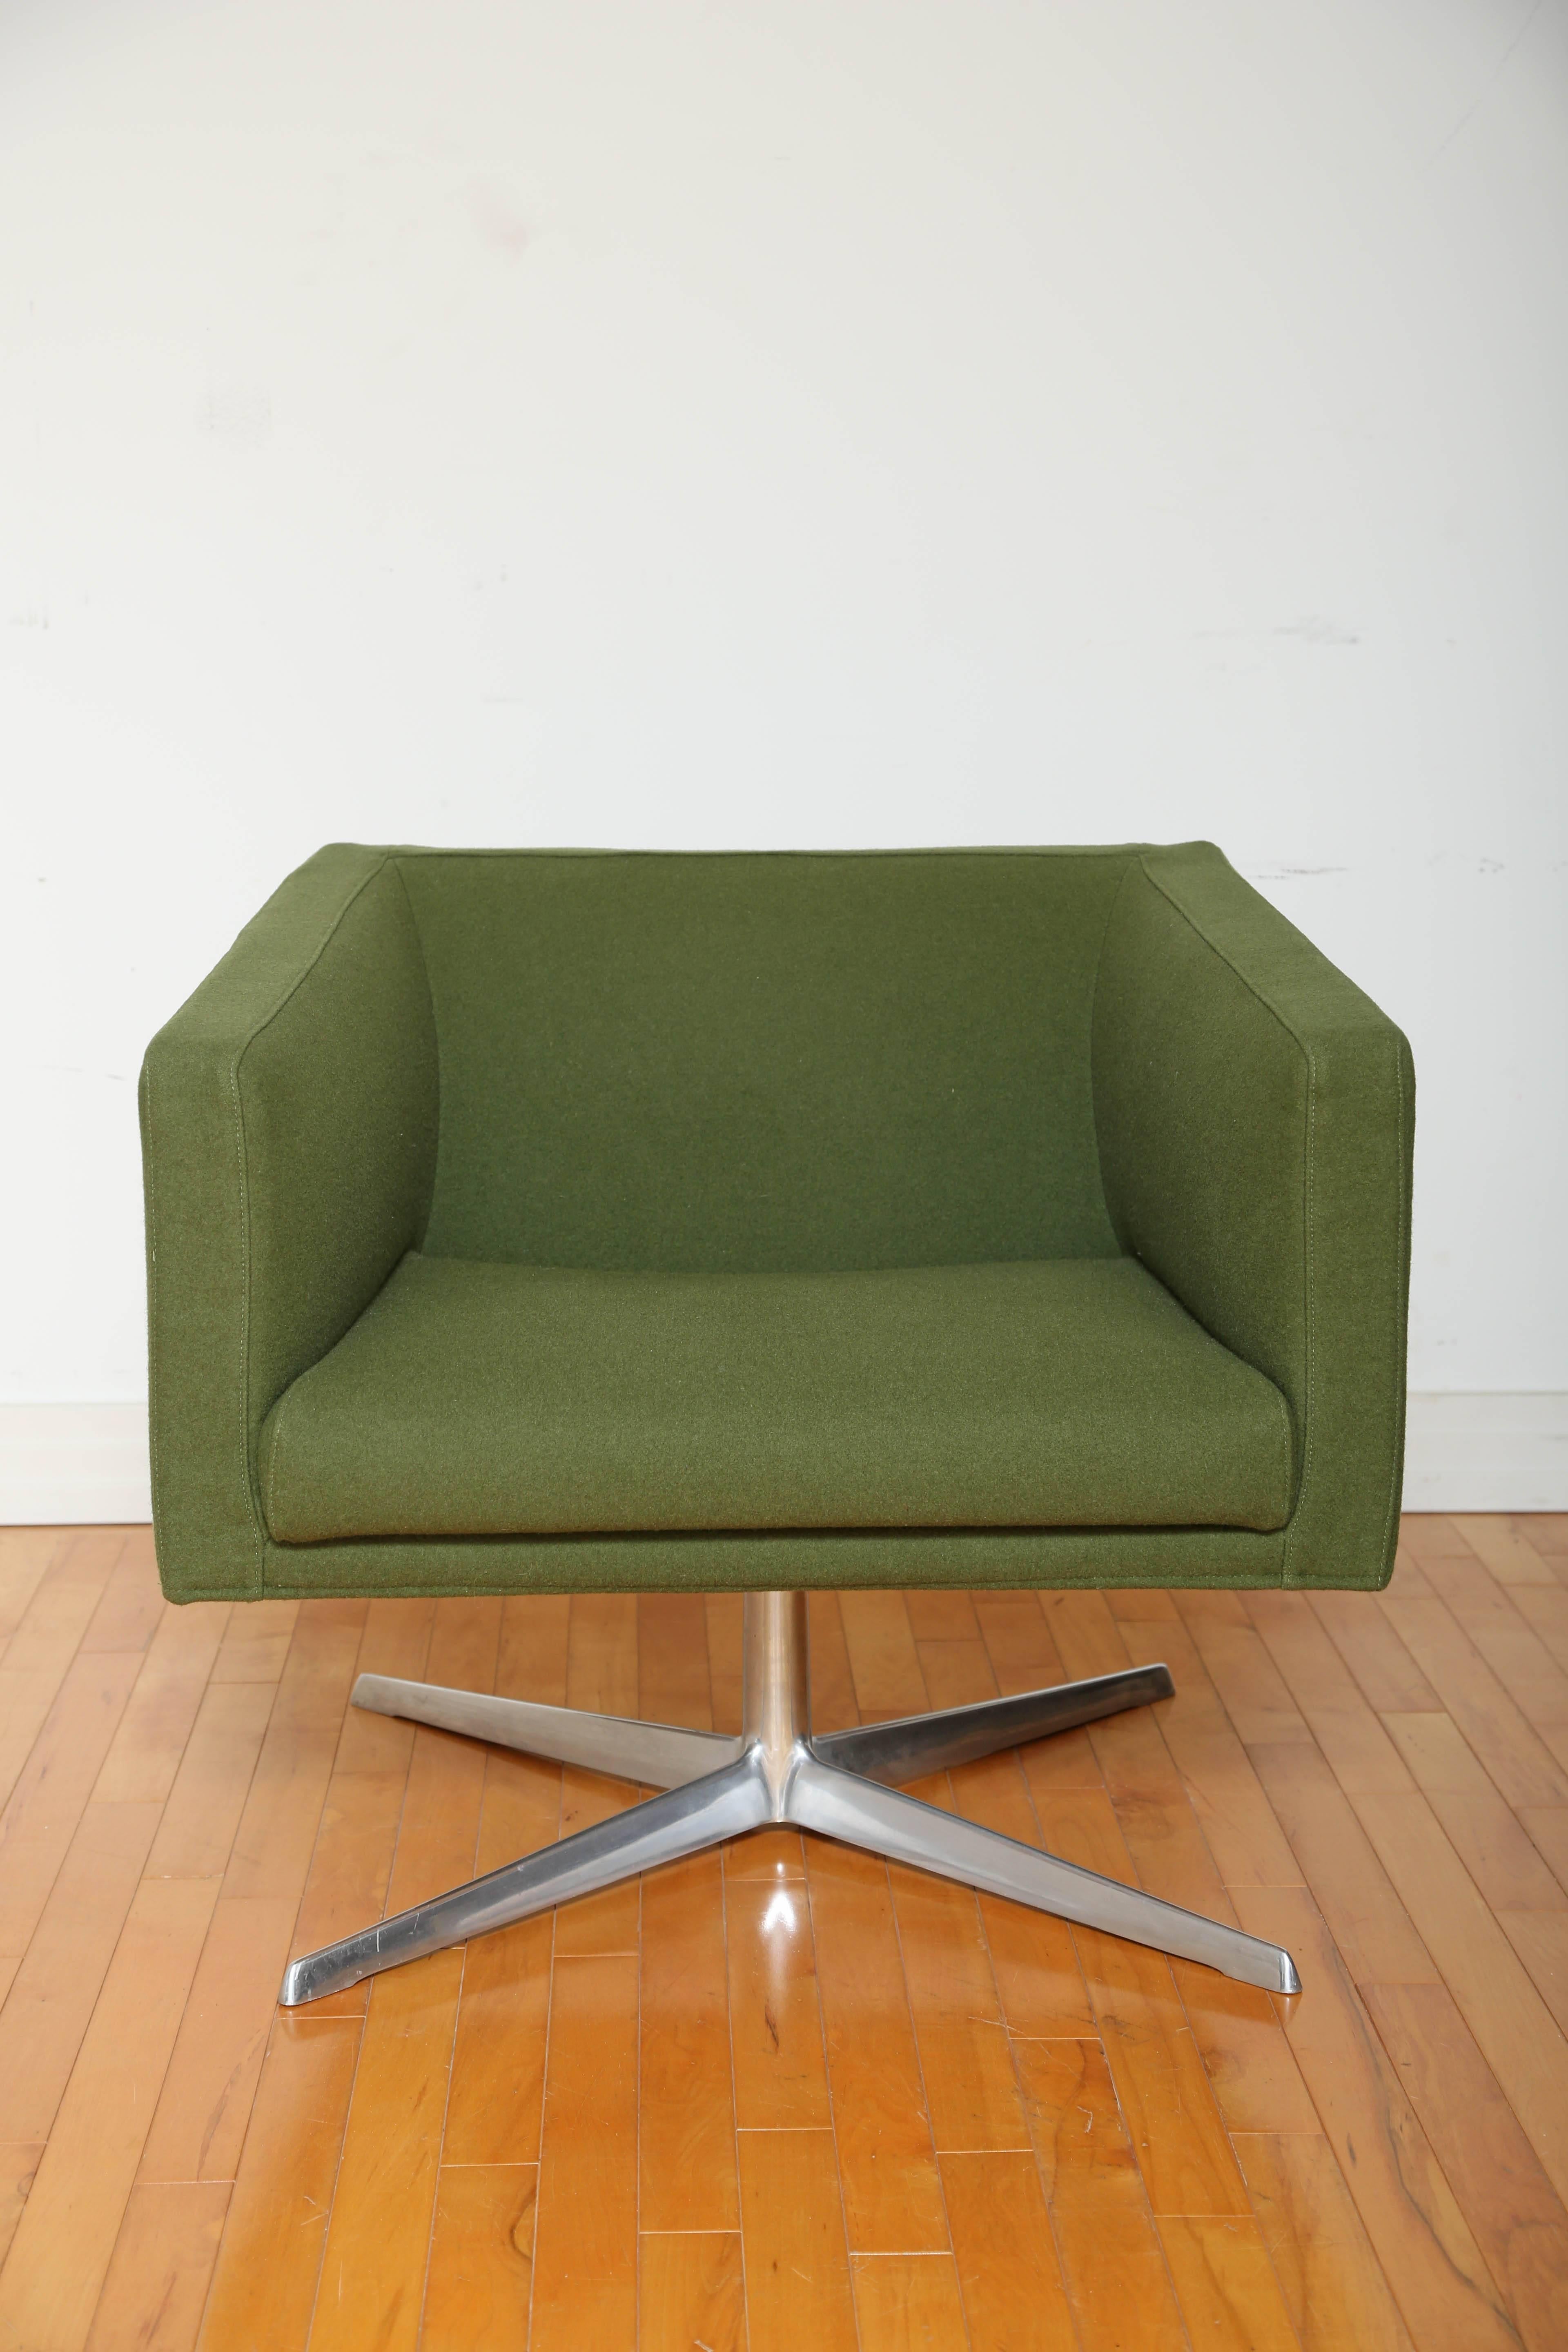 Cubica swivel armchair by Verzelloni. Features Mid-Century Modern design with cubist form, and full 360 degree swivel. Streamline design lends itself to both home or office setting. Upholstered in army green wool blend fabric with four legged